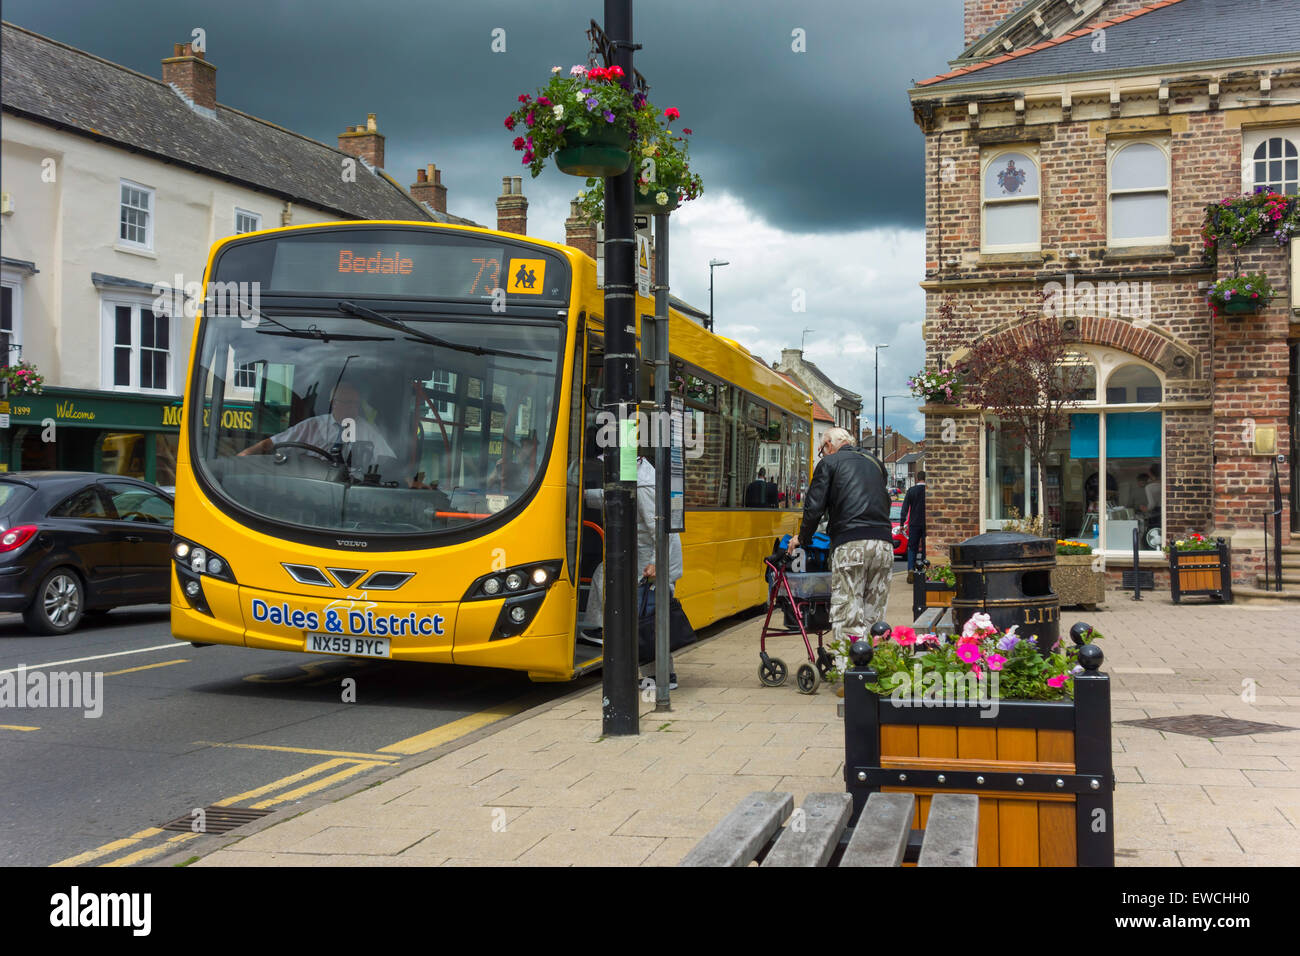 Passengers customers boarding a bright yellow Dales and District Bus to Bedale at Northallerton Town Centre Stock Photo